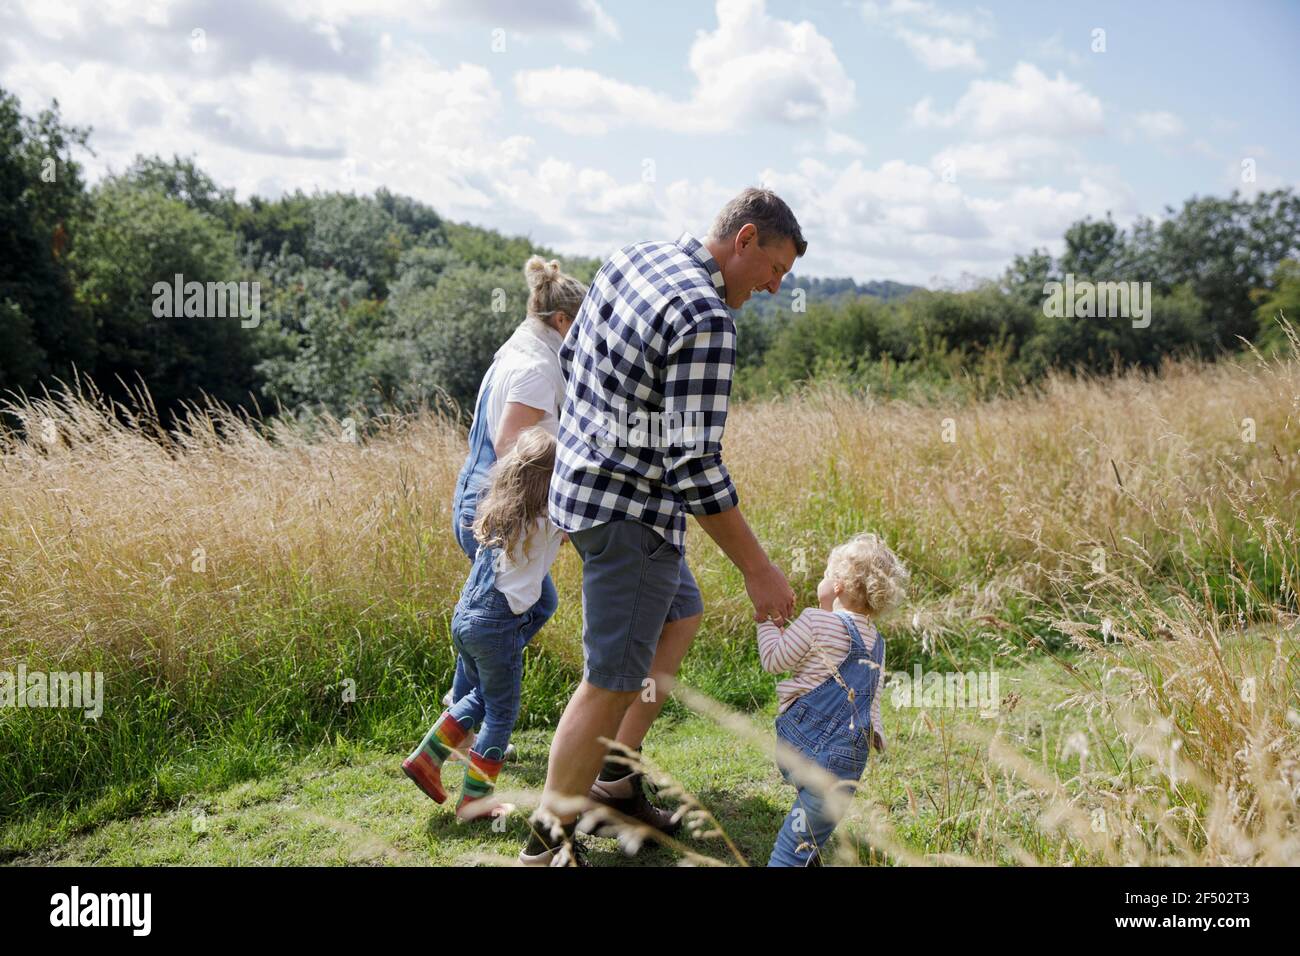 Family holding hands walking in sunny rural summer field Stock Photo